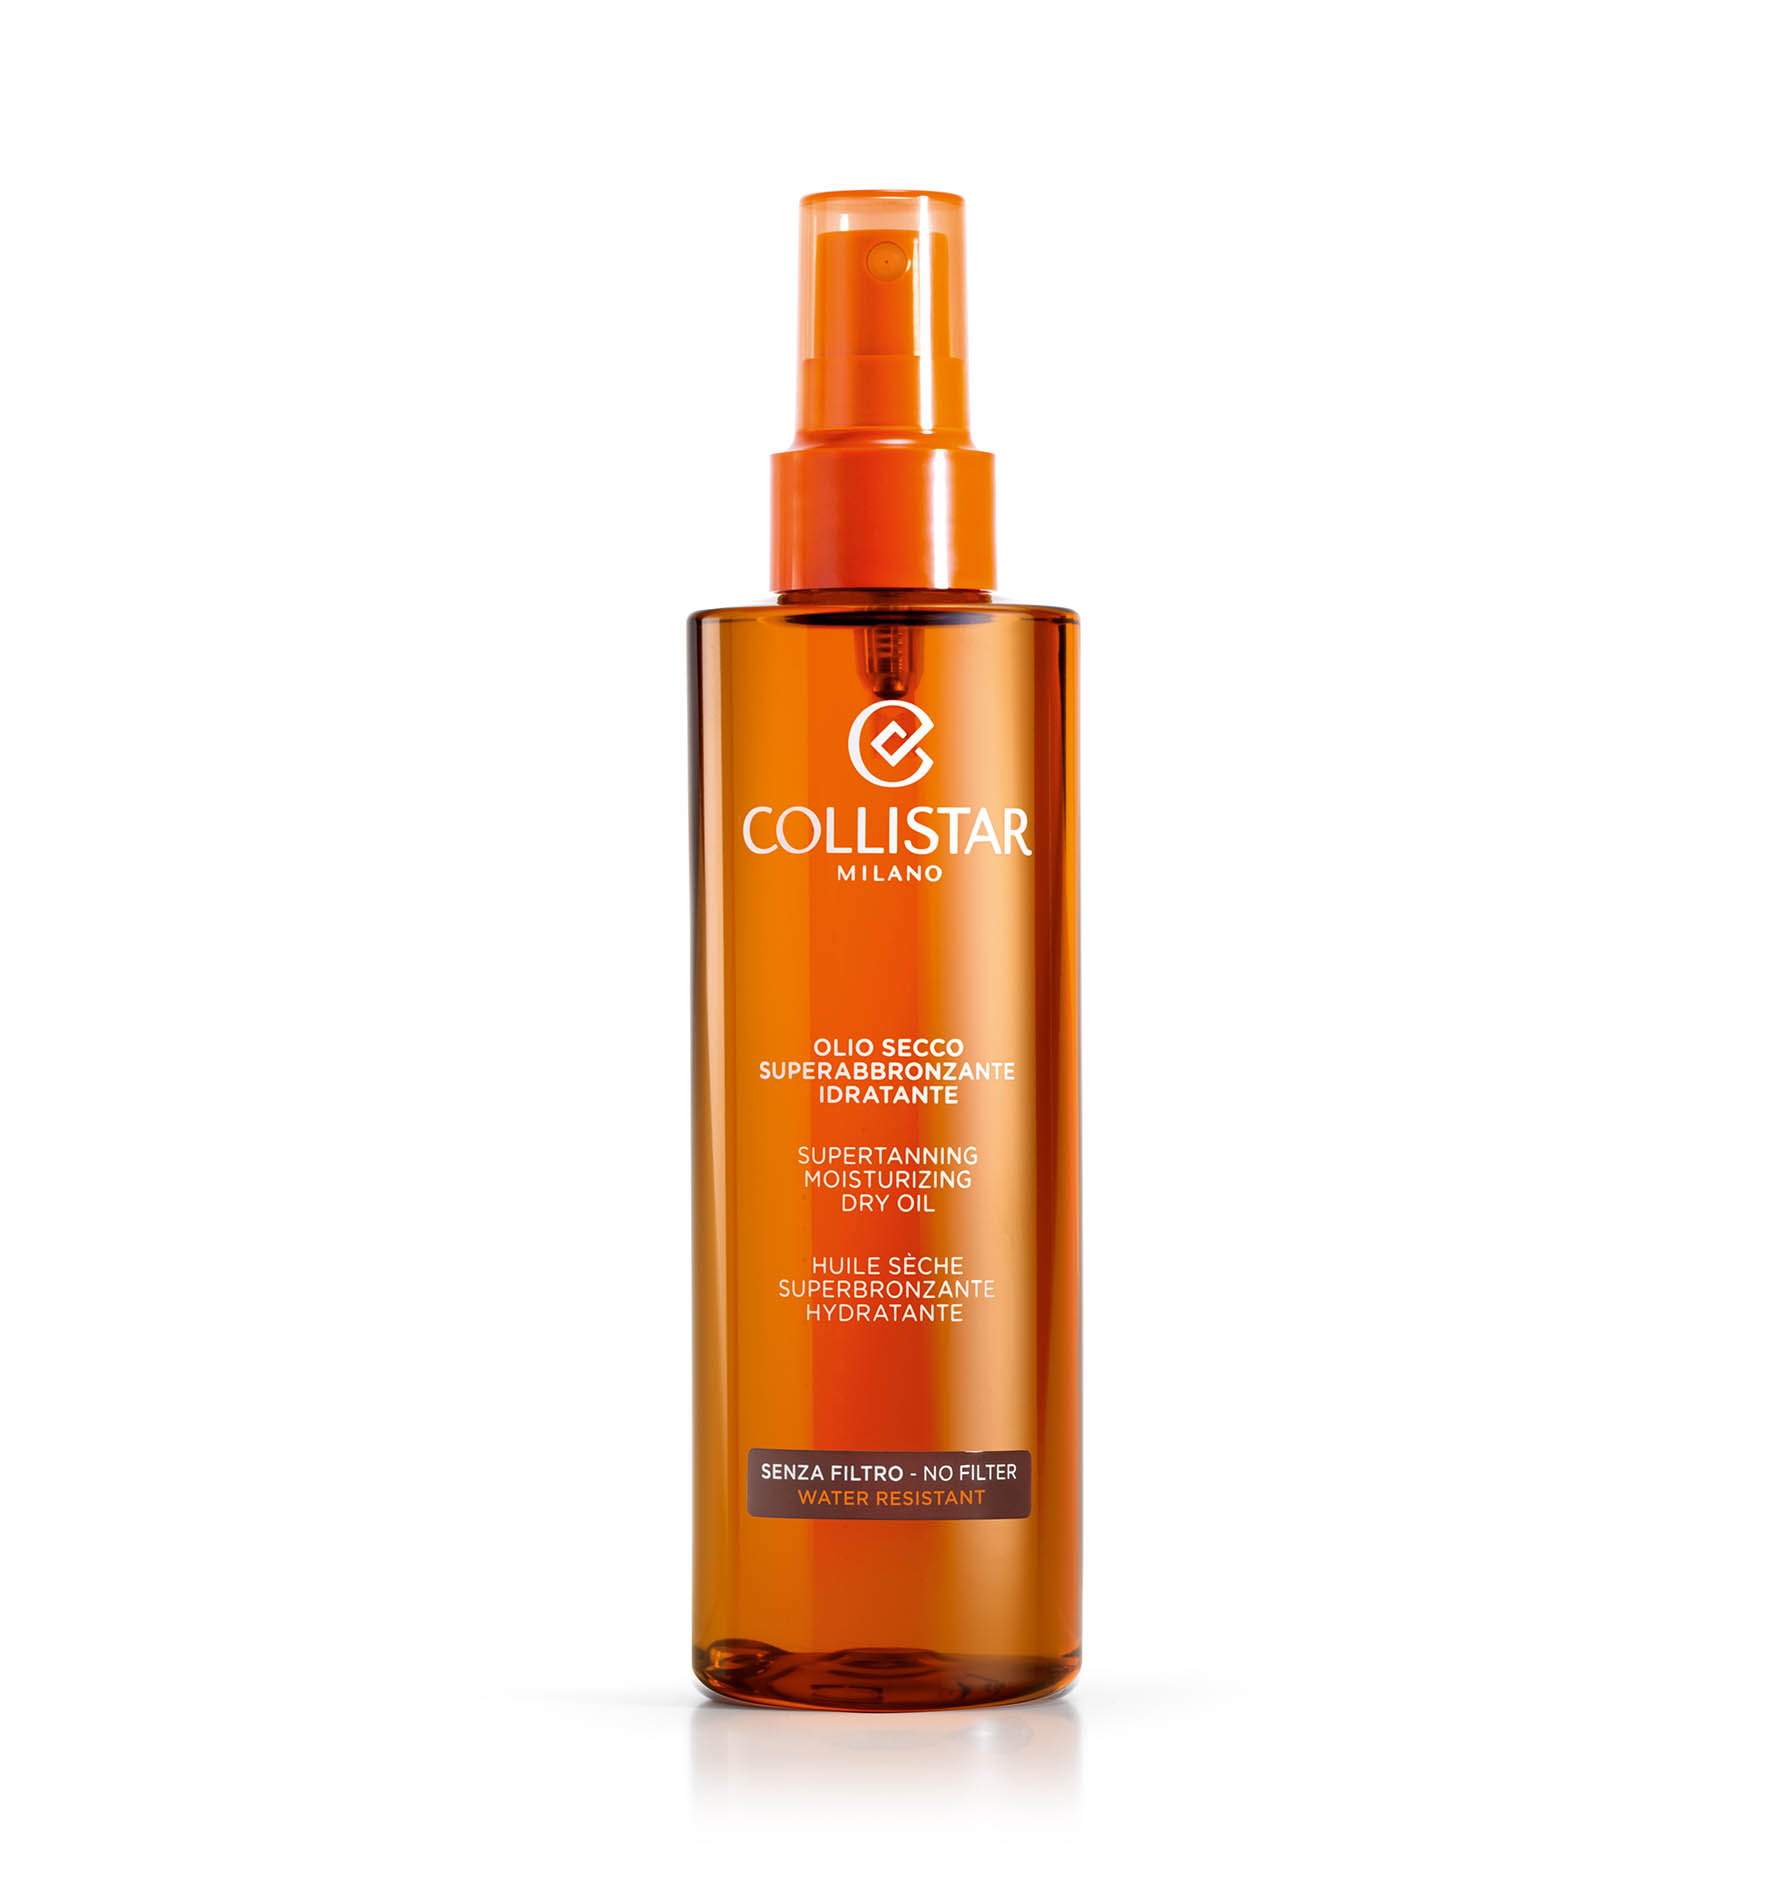 SUPERTANNING DRY OIL - Tanning oil | Collistar - Shop Online Ufficiale